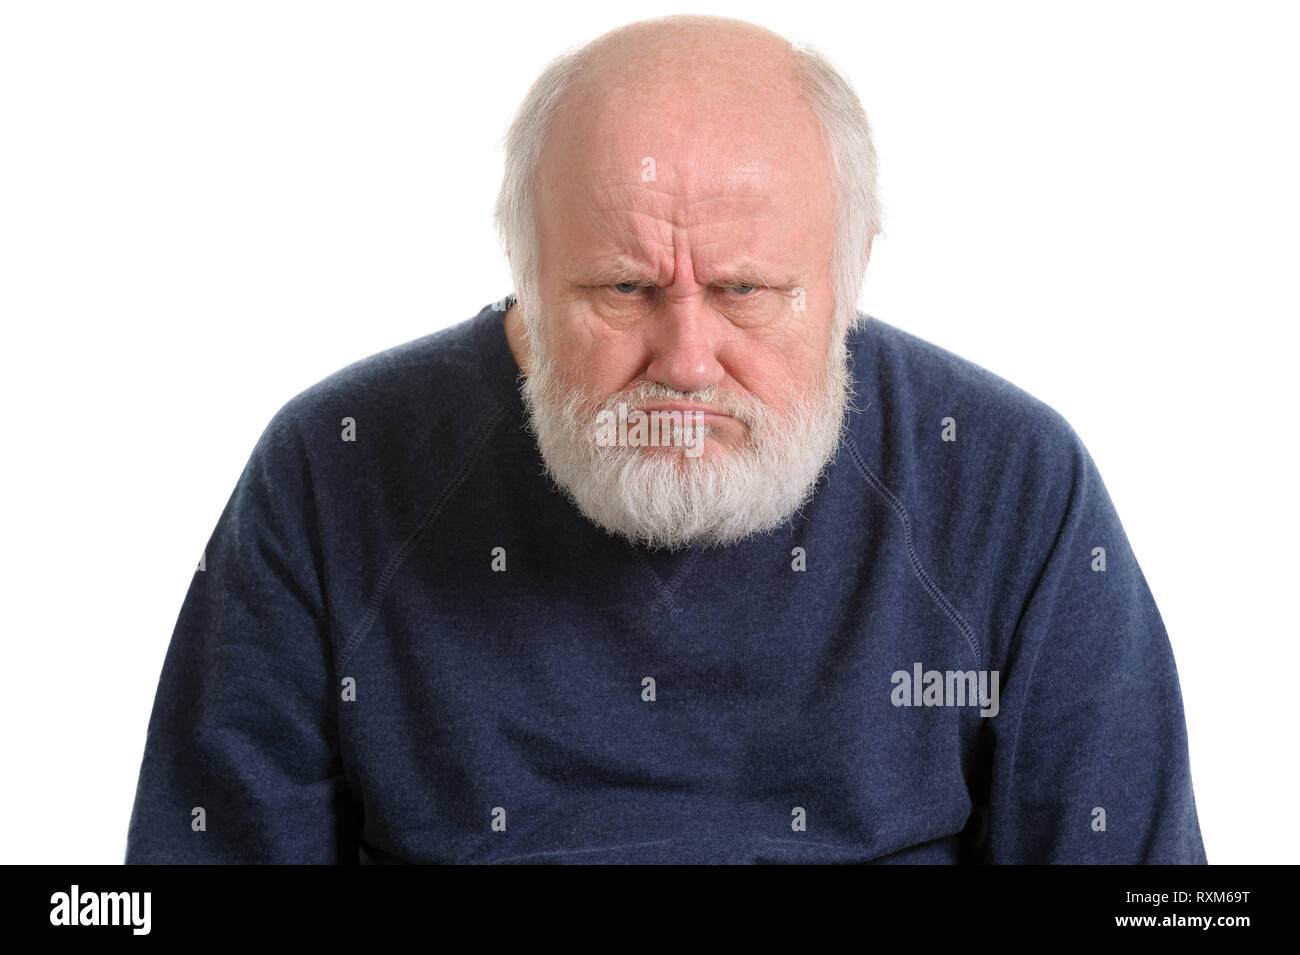 grumpy oldfart or dissatisfied displeased old man isolated portrait Stock Photo